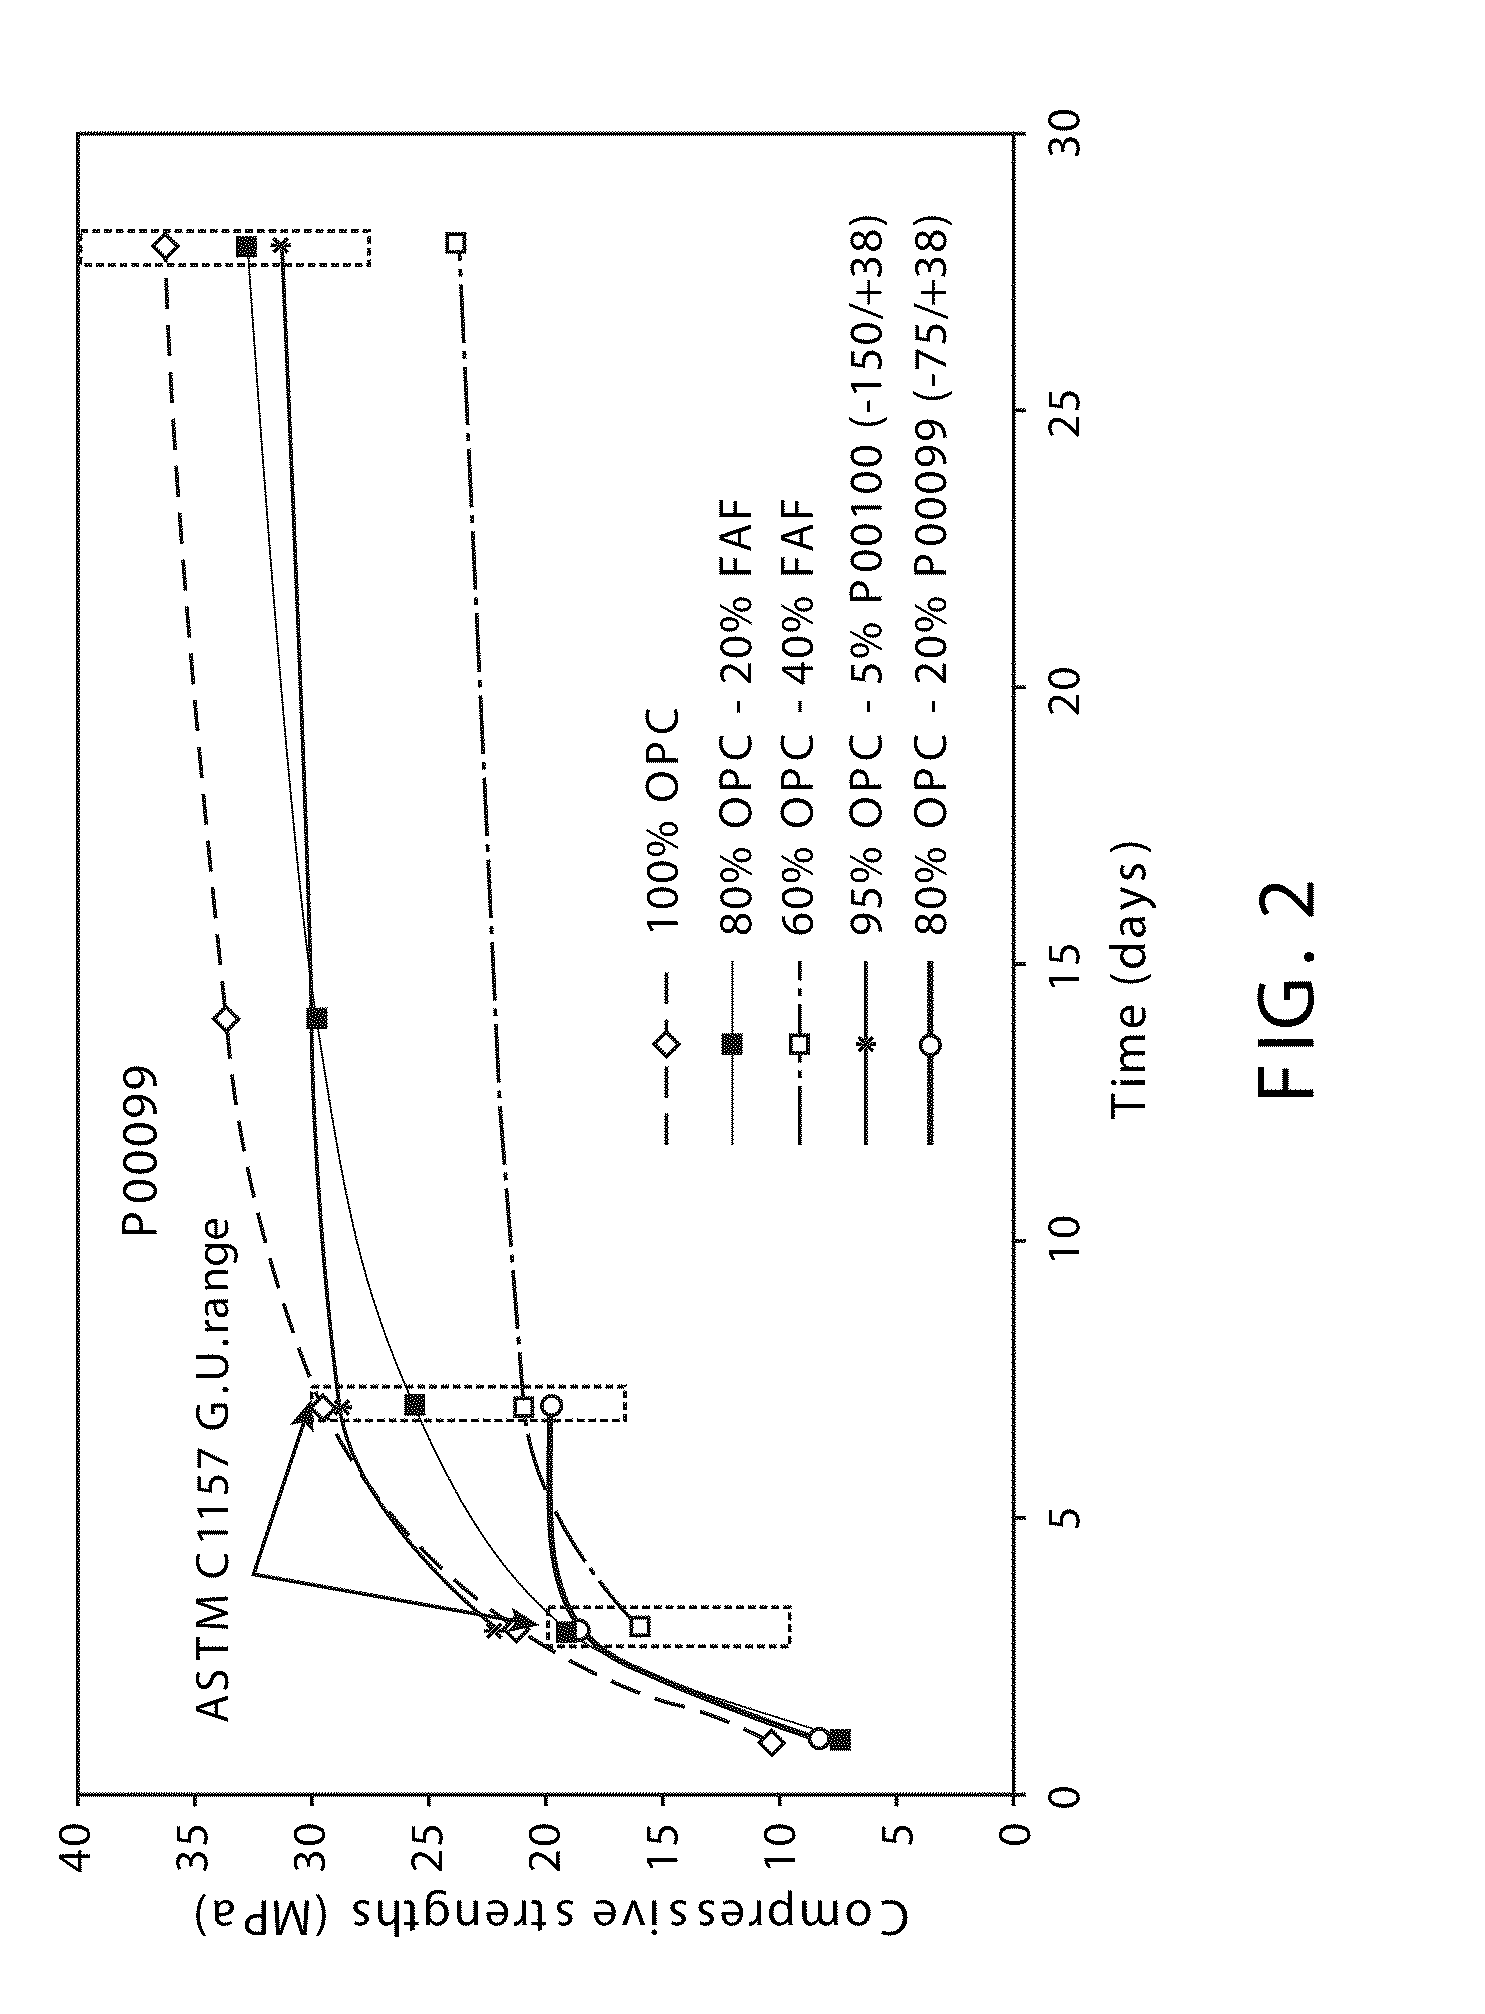 Desalination methods and systems that include carbonate compound precipitation